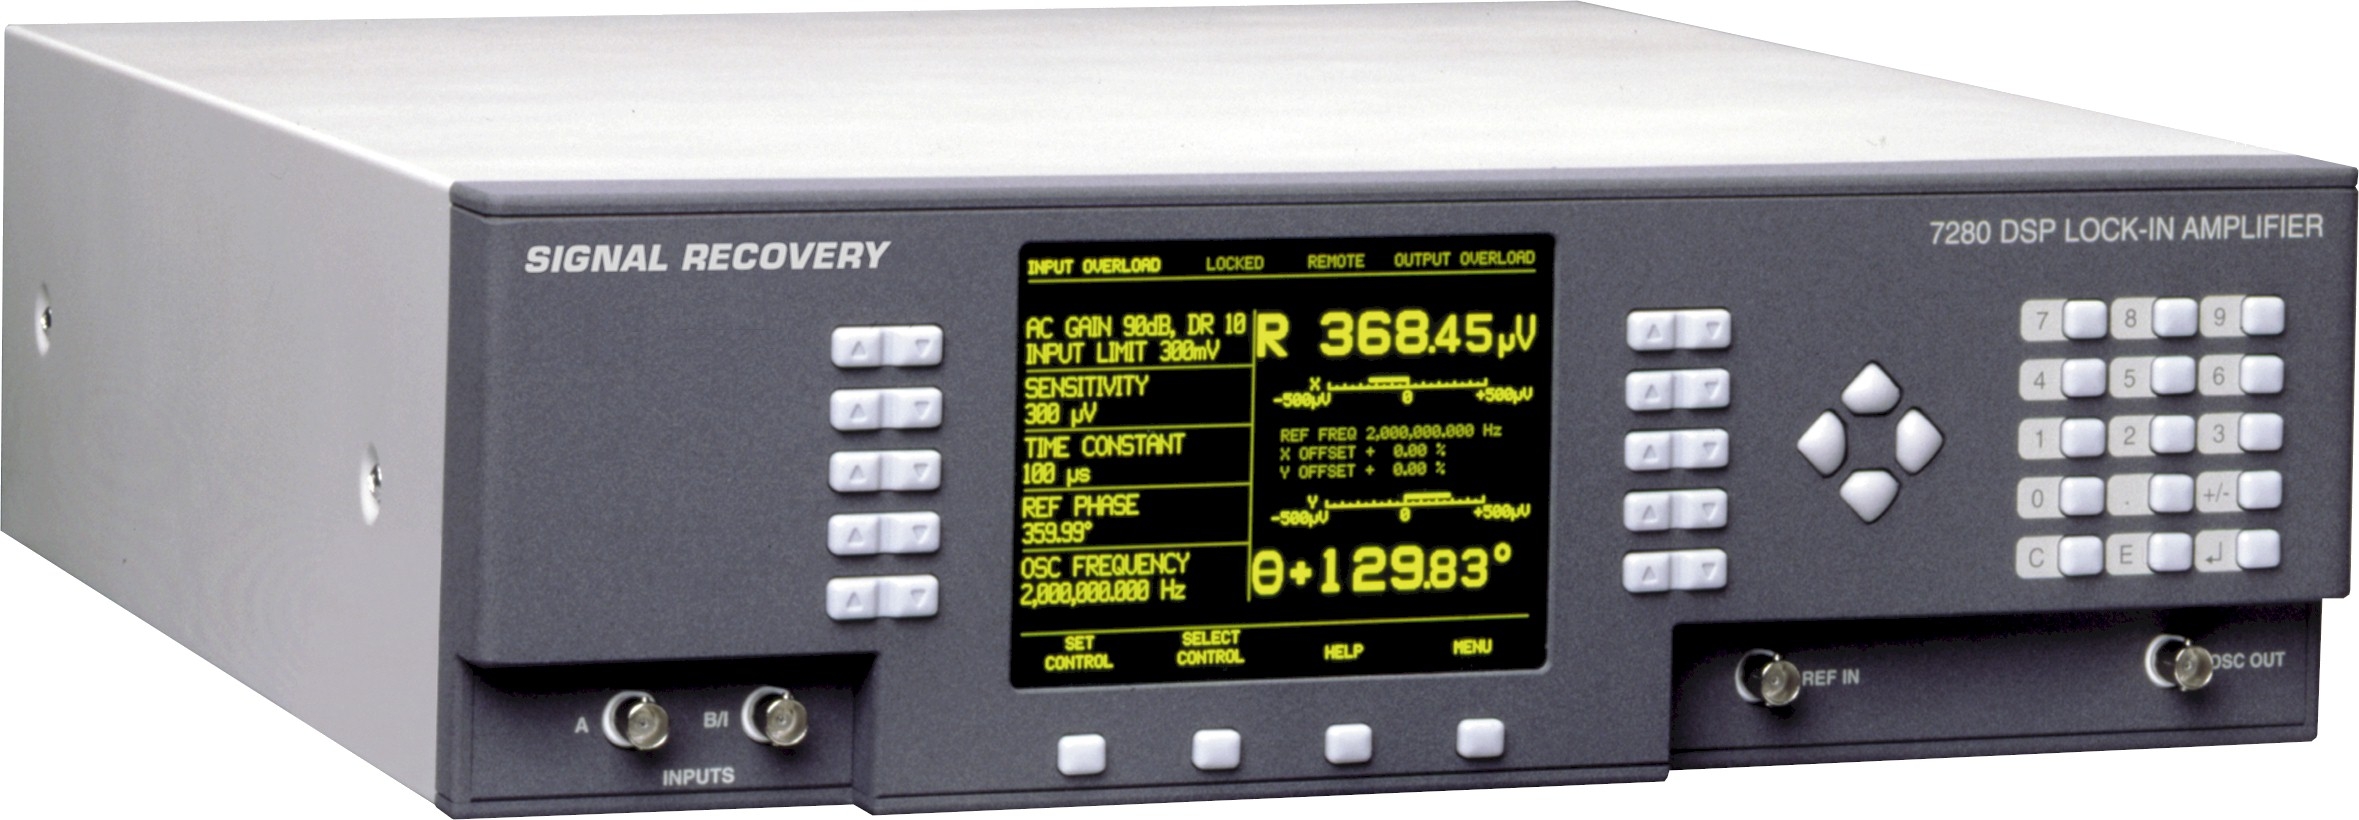 Signal Recovery 7280 Wide Bandwidth DSP Lock-In Amplifier, 0.5 Hz to 2.0 MHz